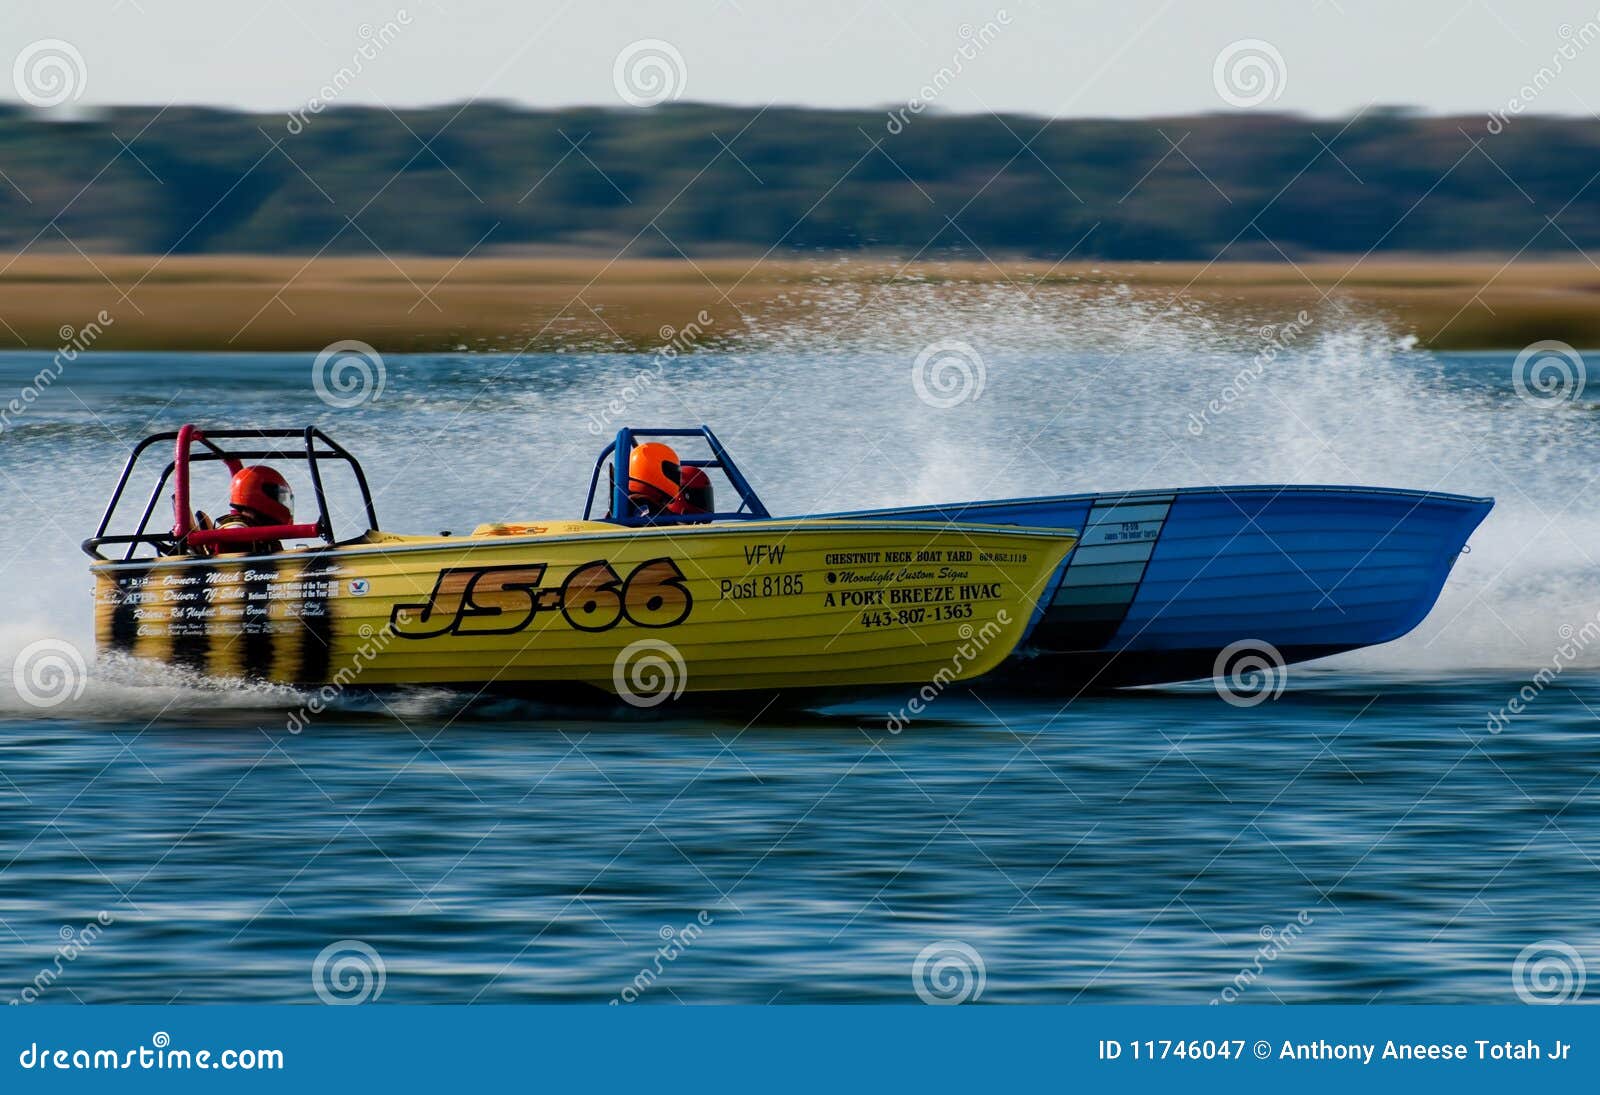 Jersey Speed Skiff Editorial Photography - Image: 11746047